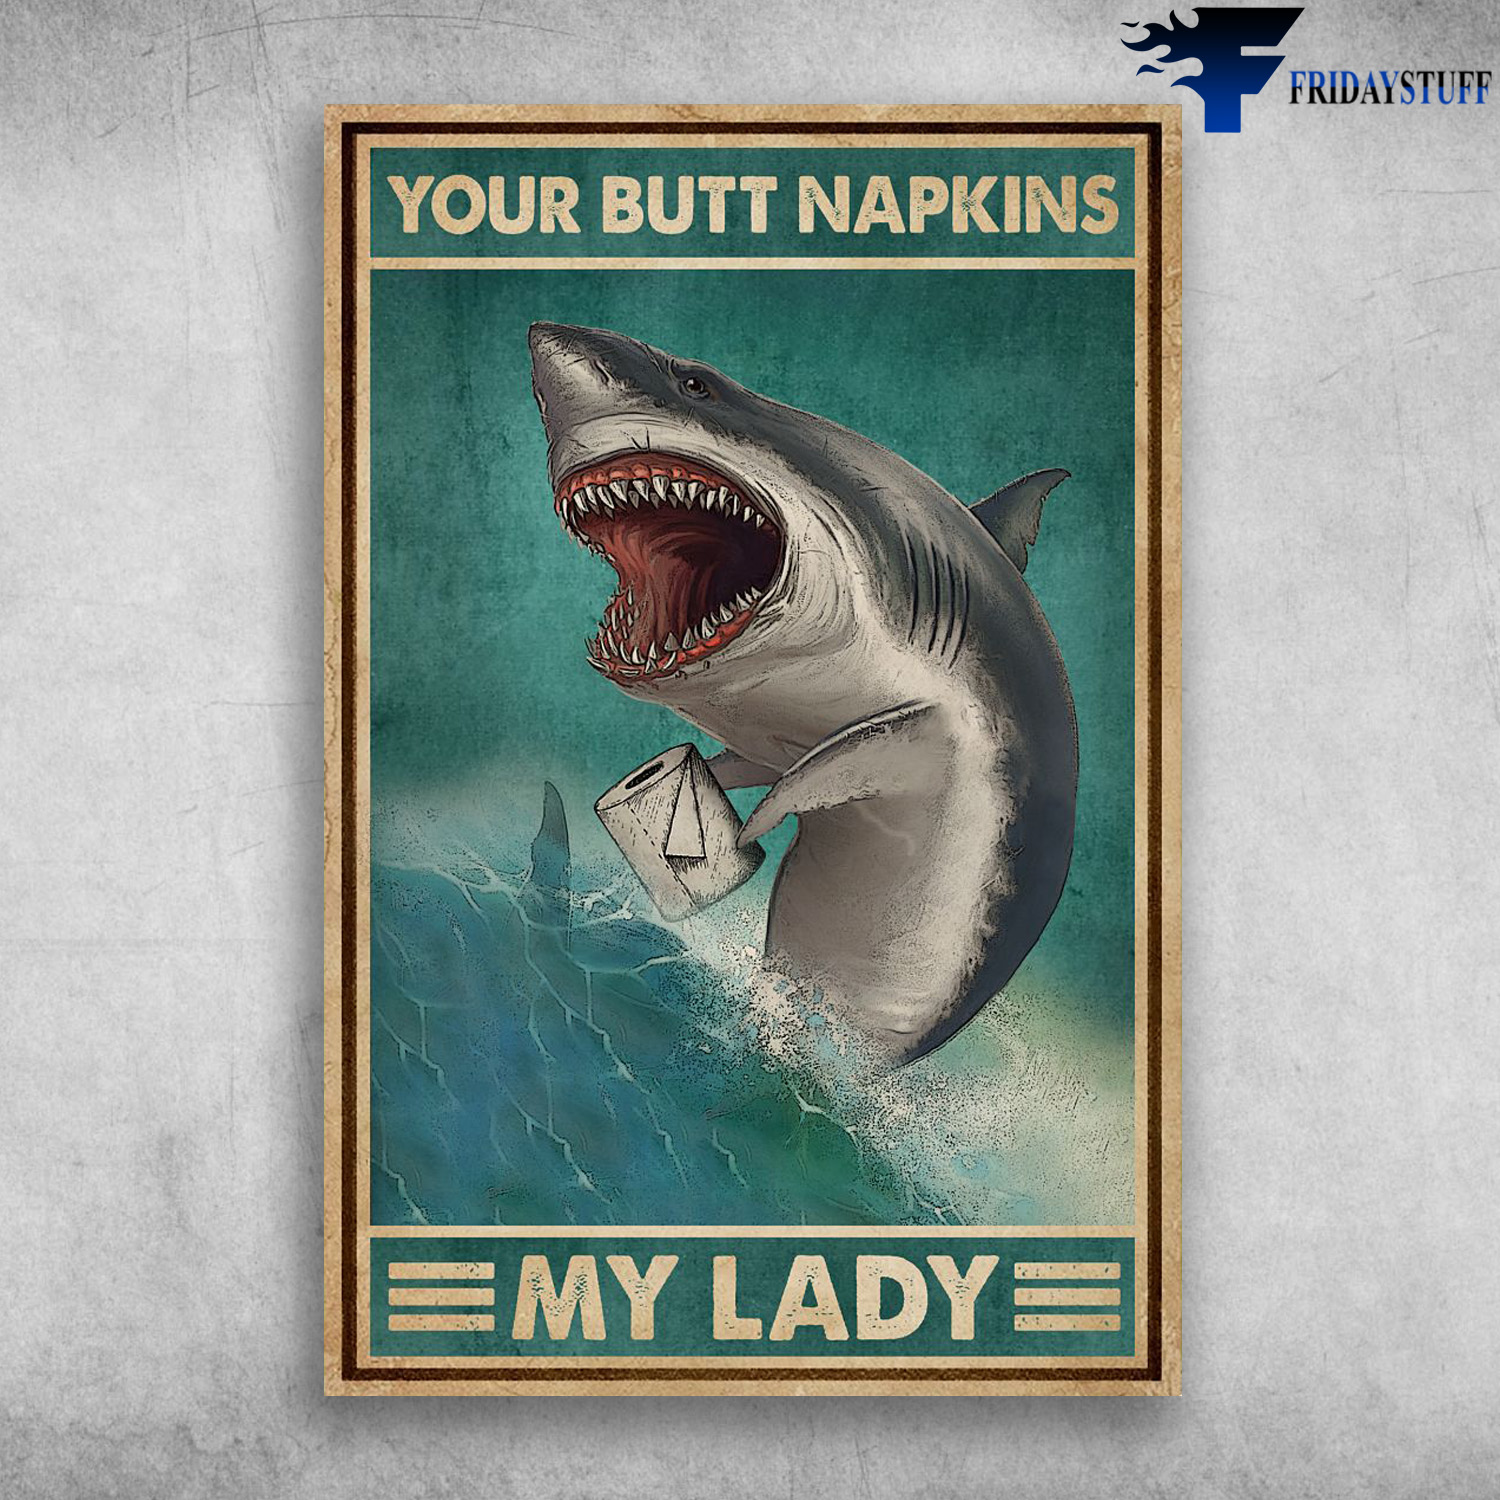 The White Shark With Toilet Paper Roll - Your Butt Napkins, My Lady